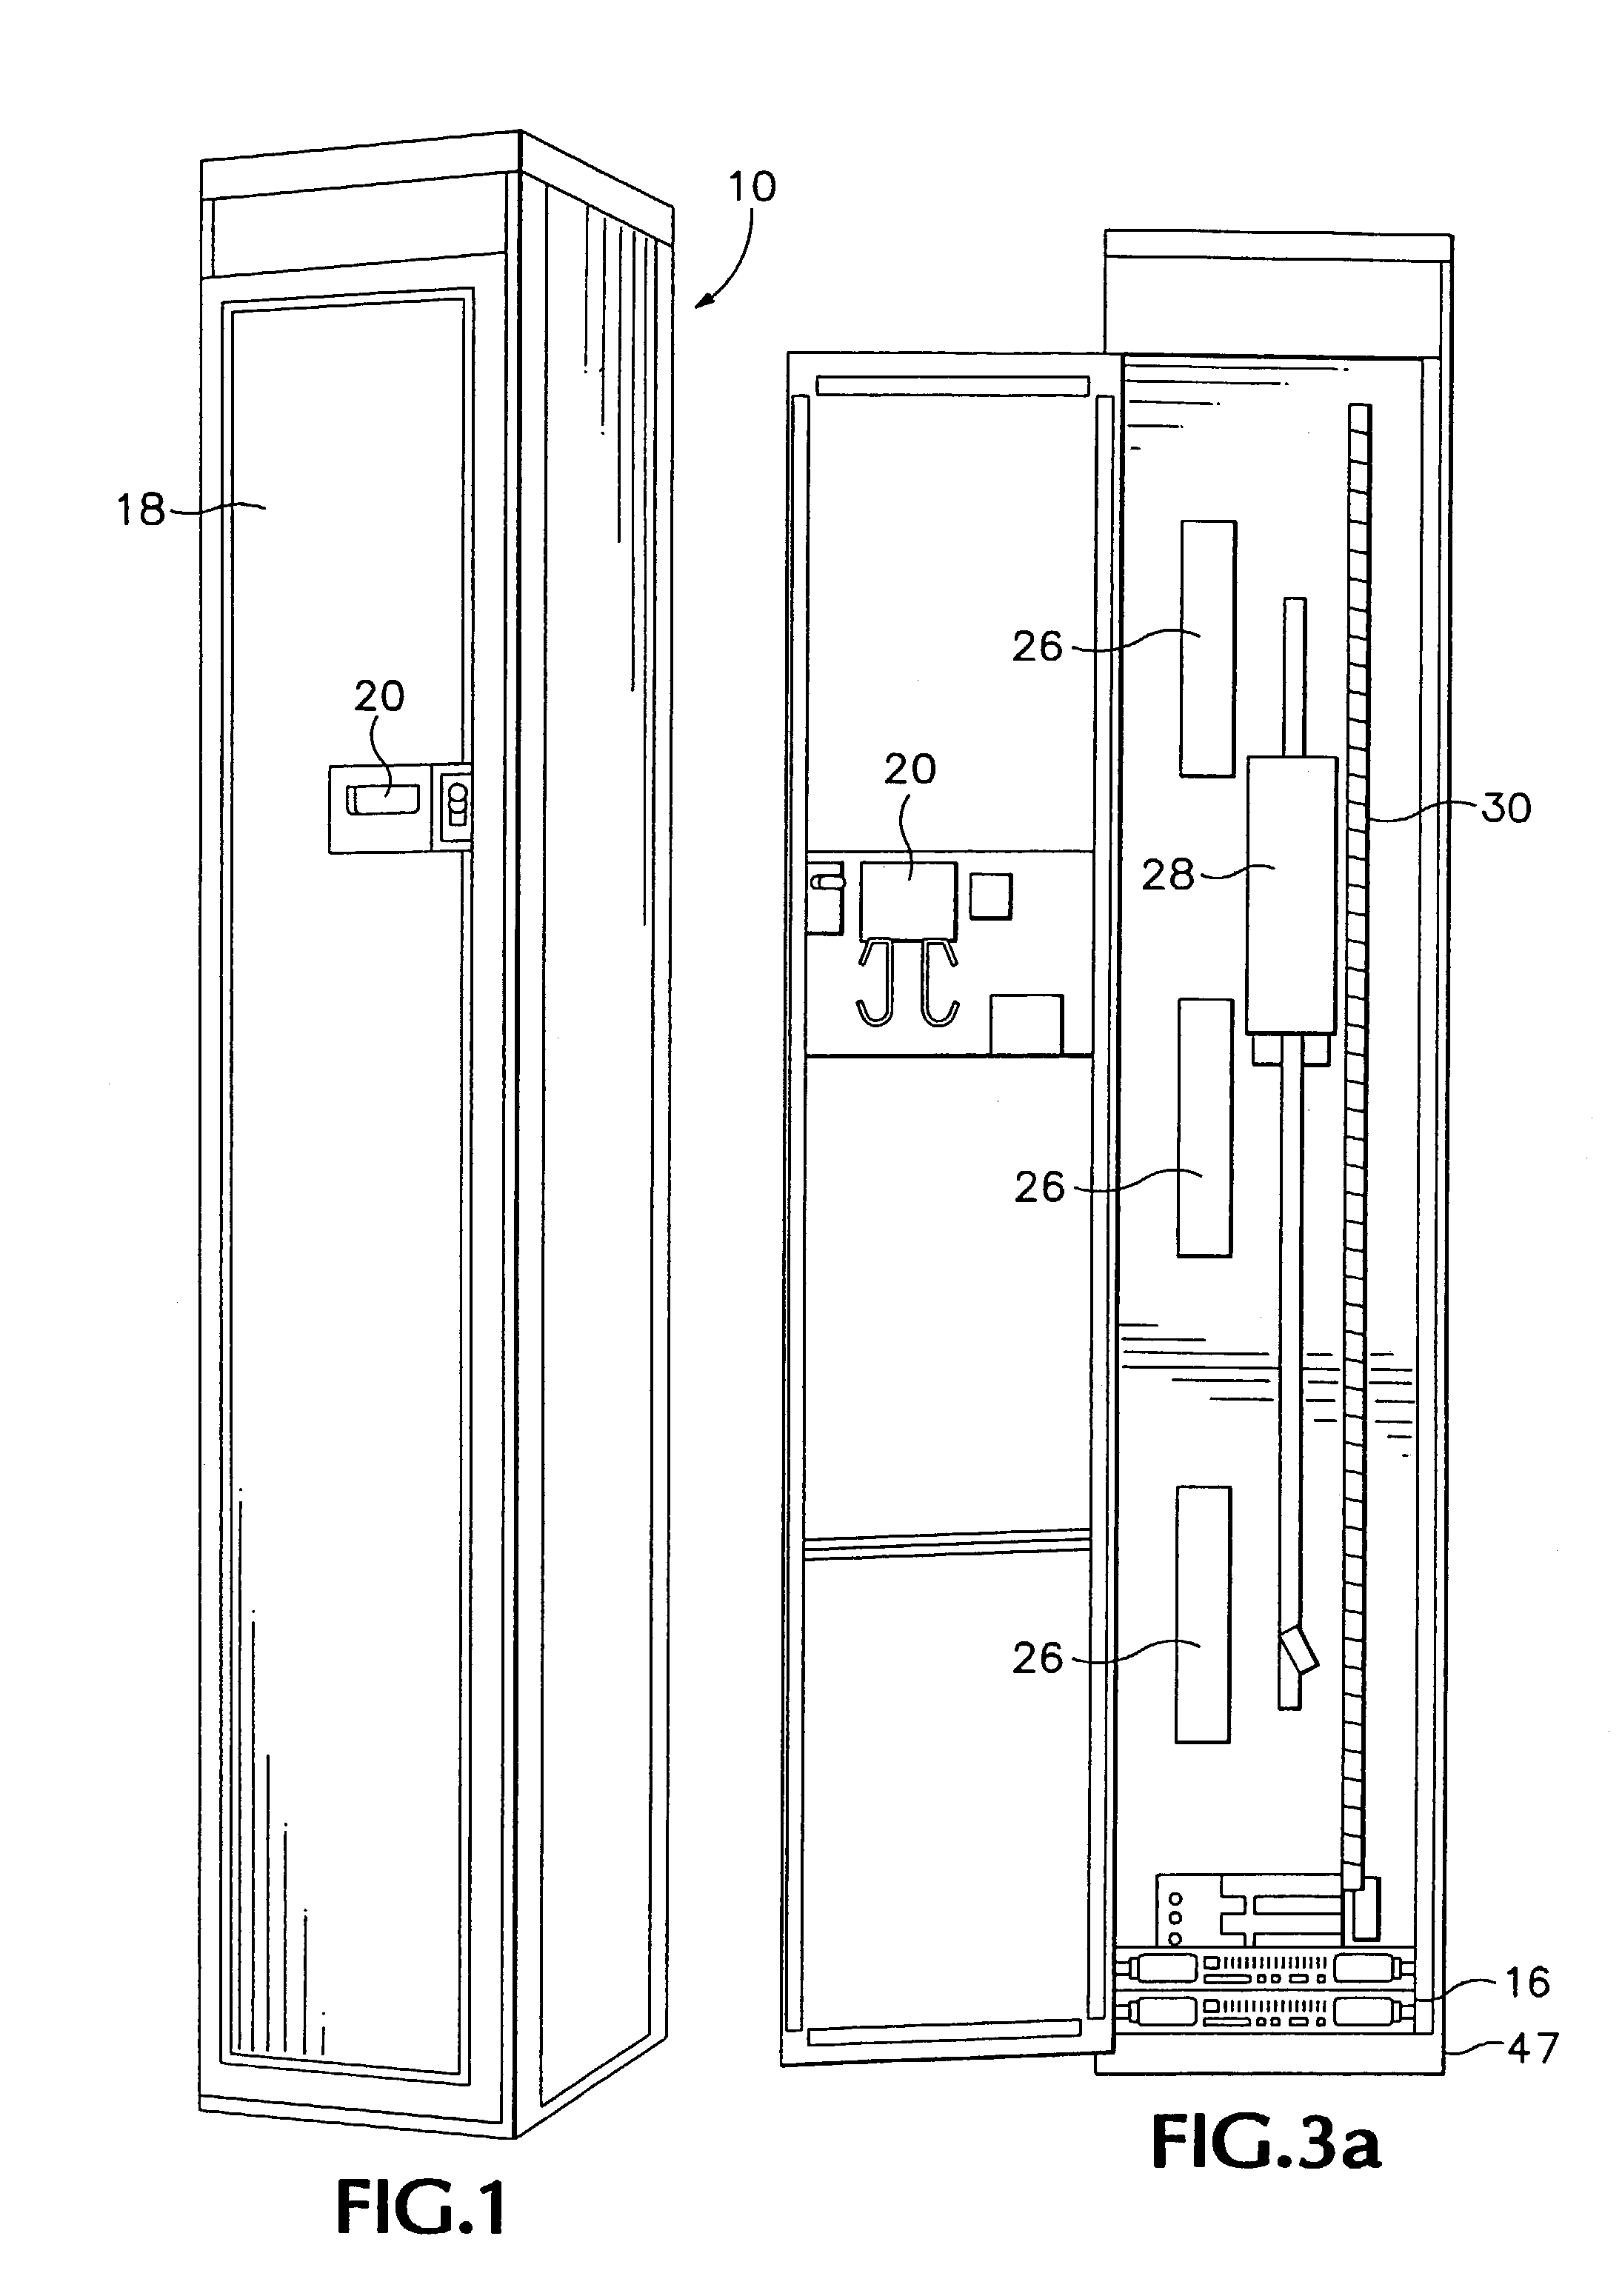 Dimming control system with distributed command processing